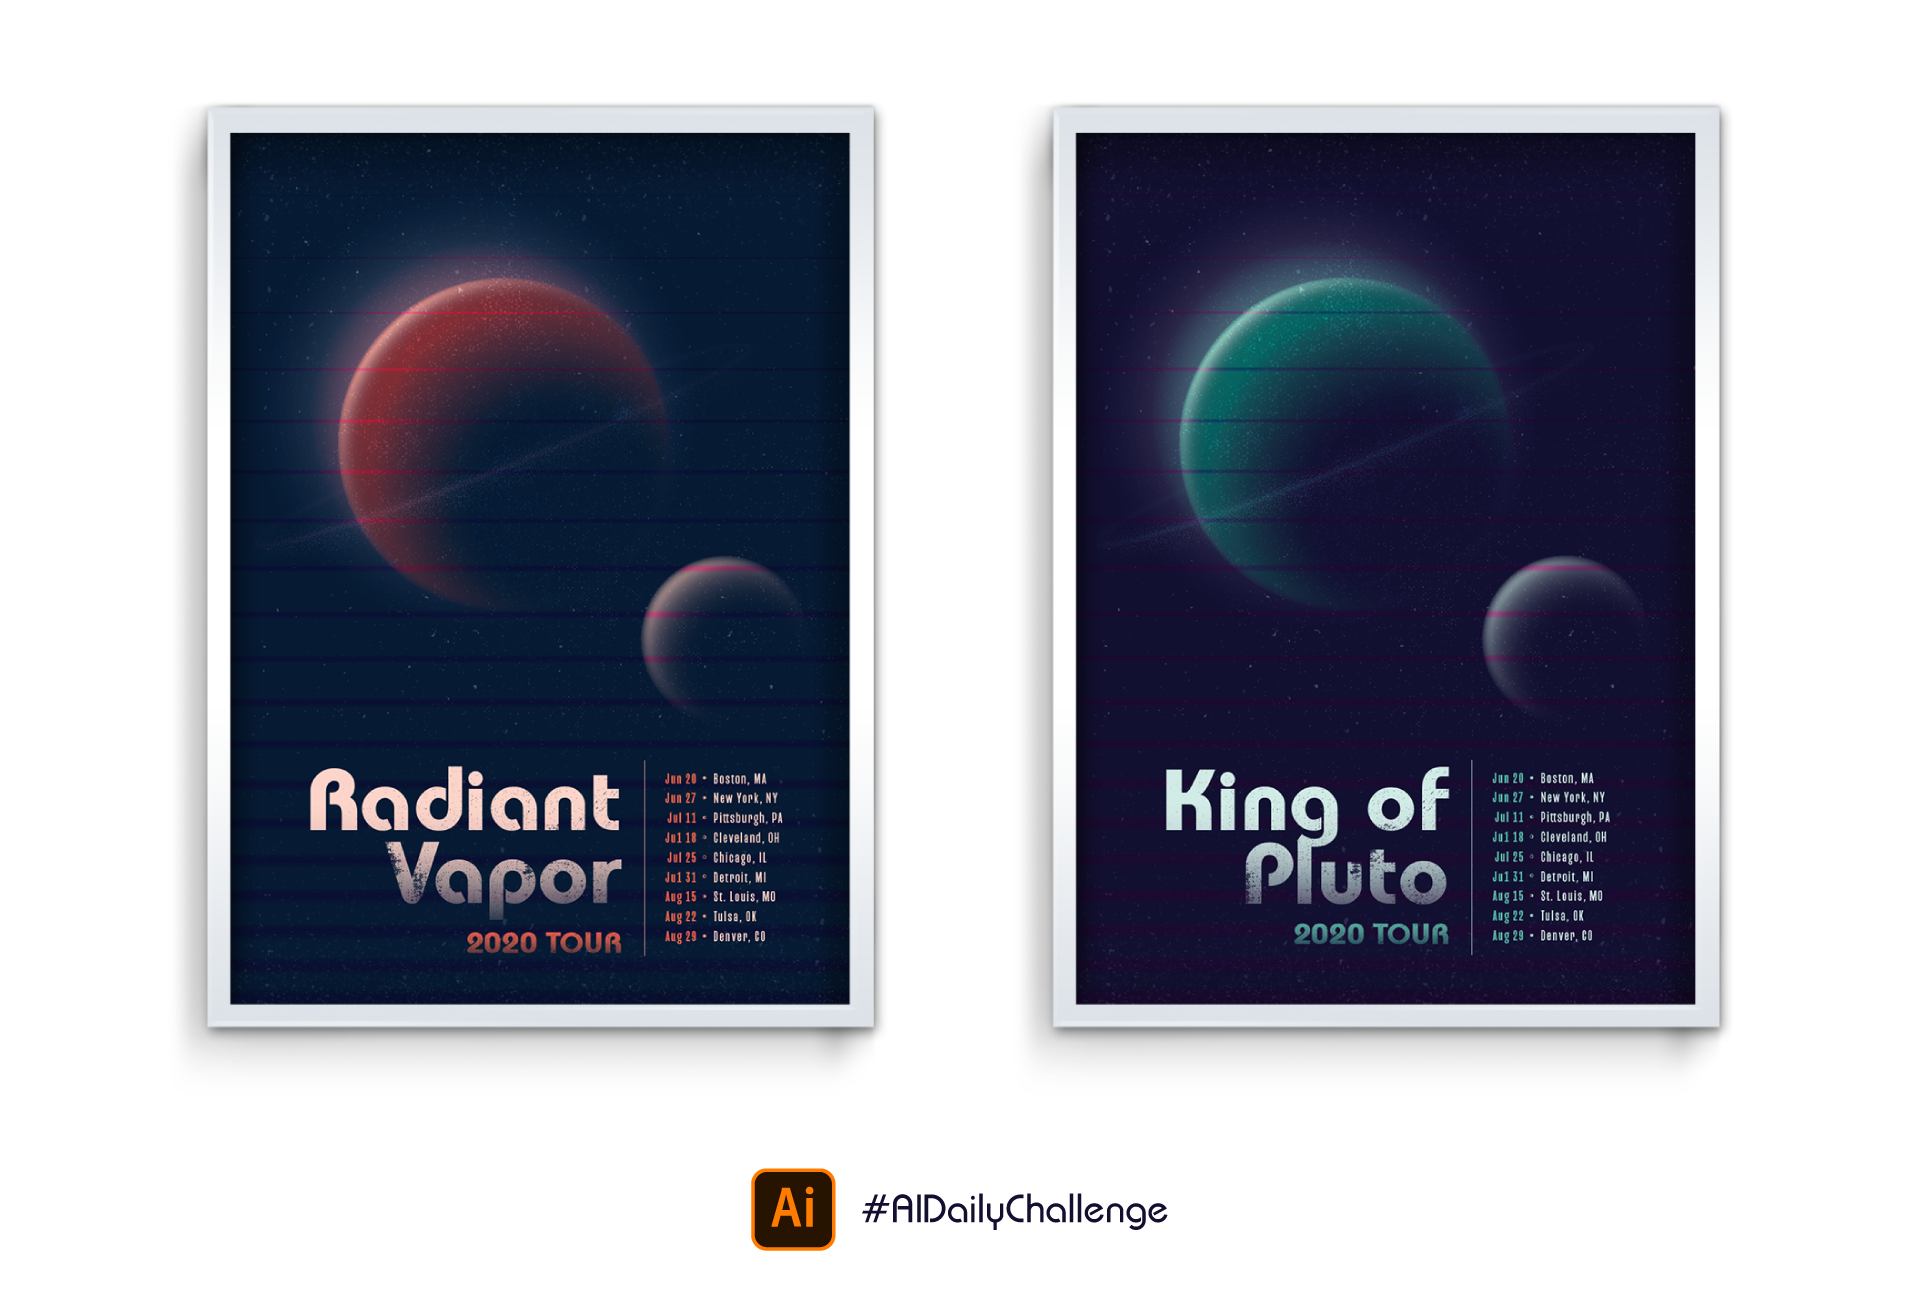 Both posters site-by-side in a thumbnail with the hashtag #AIDailyChallenge